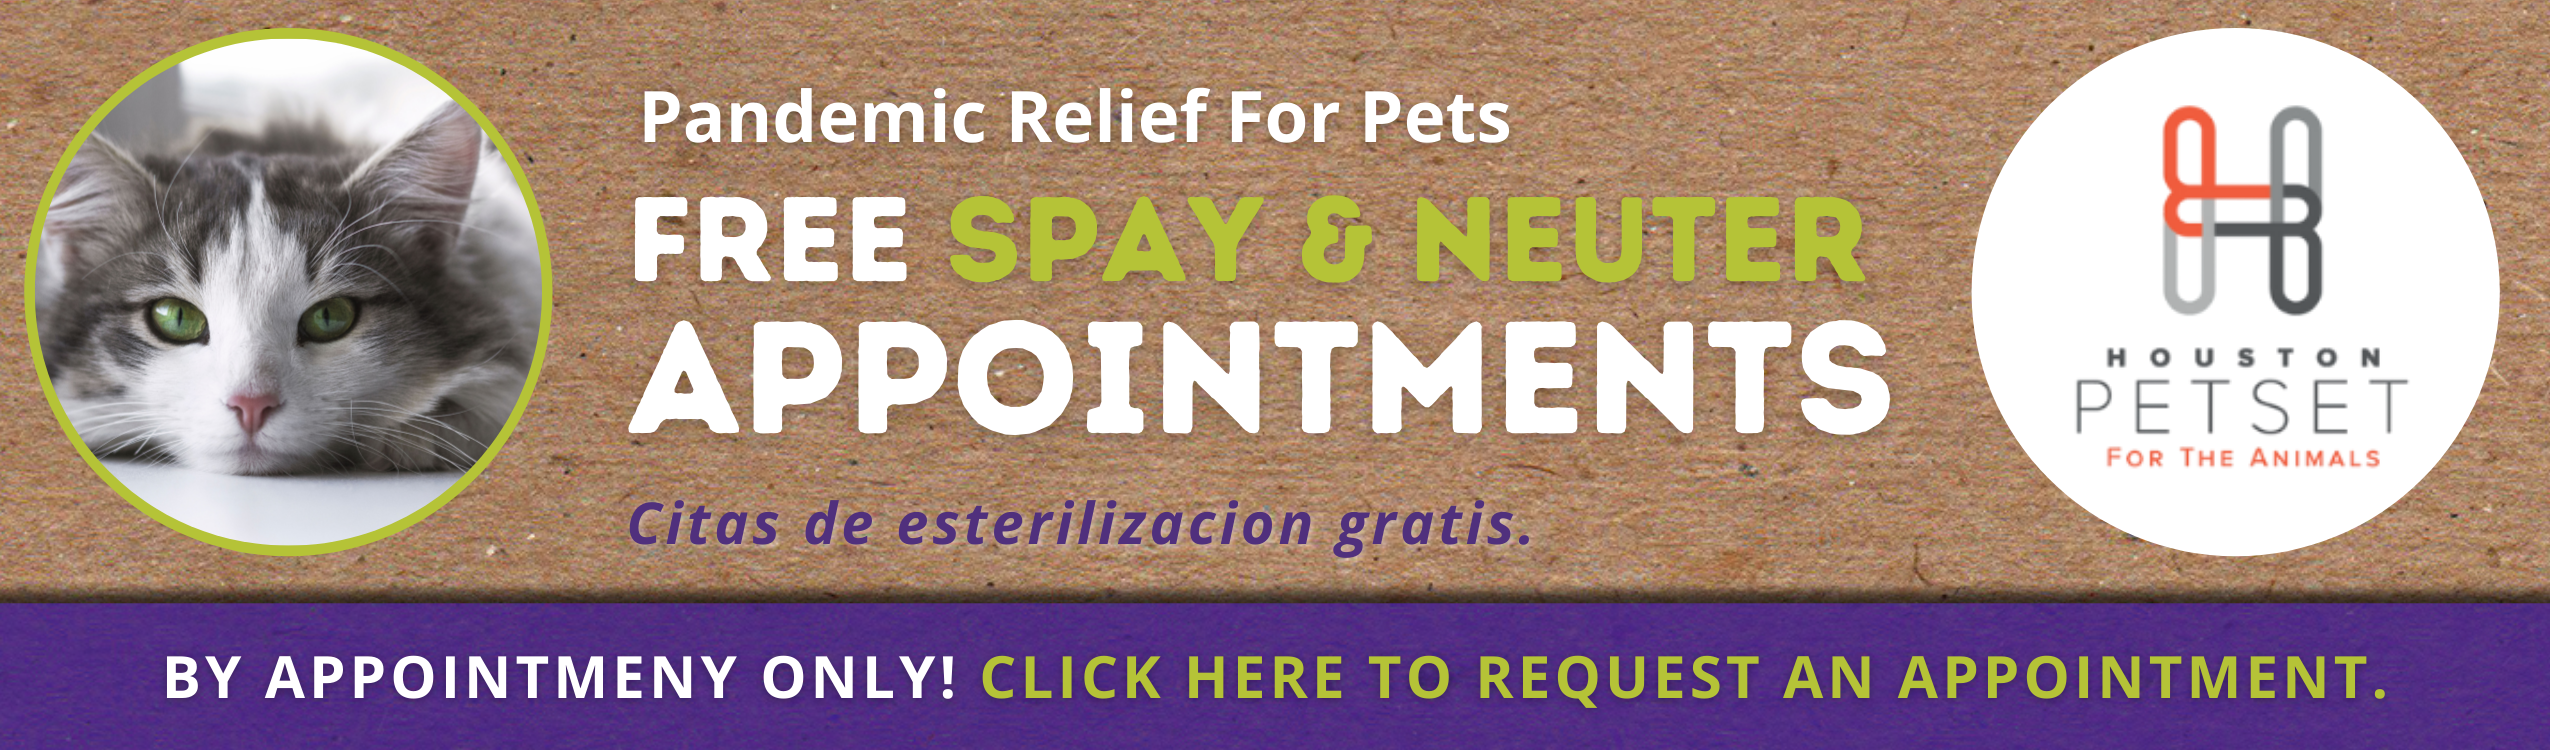 Free Spay and Neuter Services